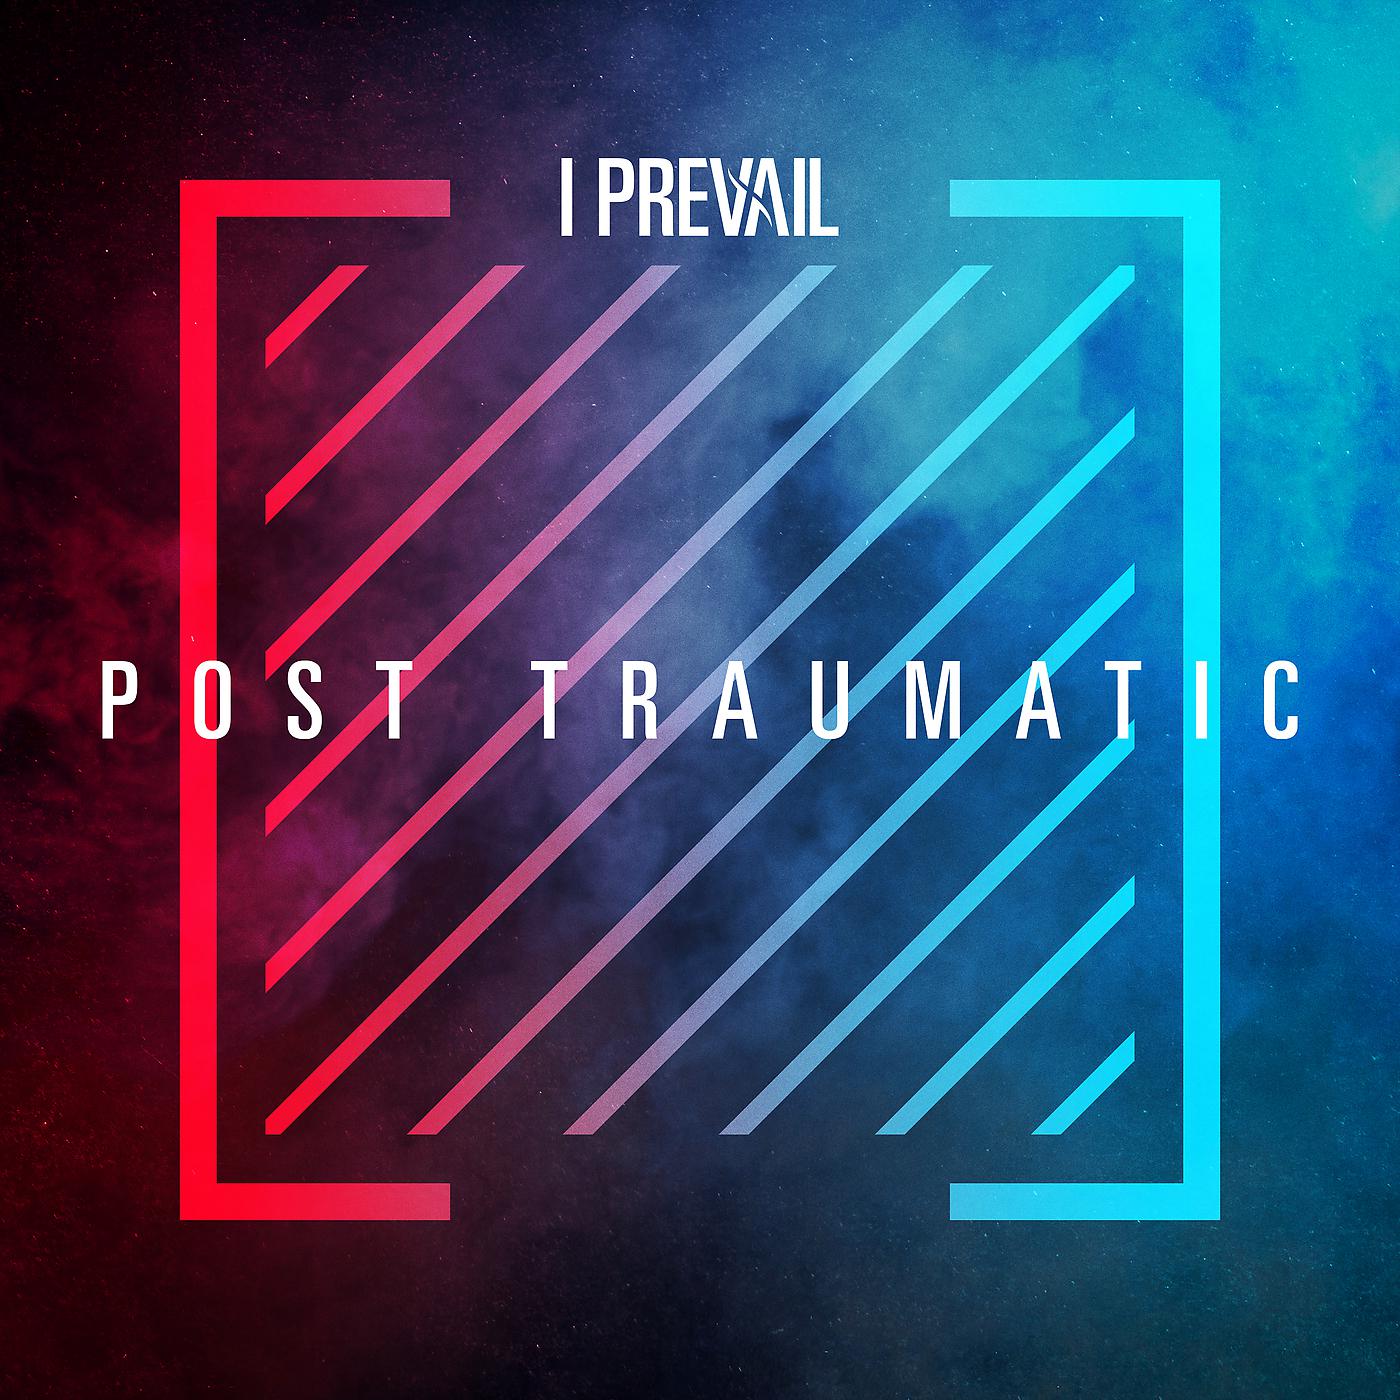 Post traumatic. Prevail. I Prevail. Обложка+Prevail. I Prevail обложка.